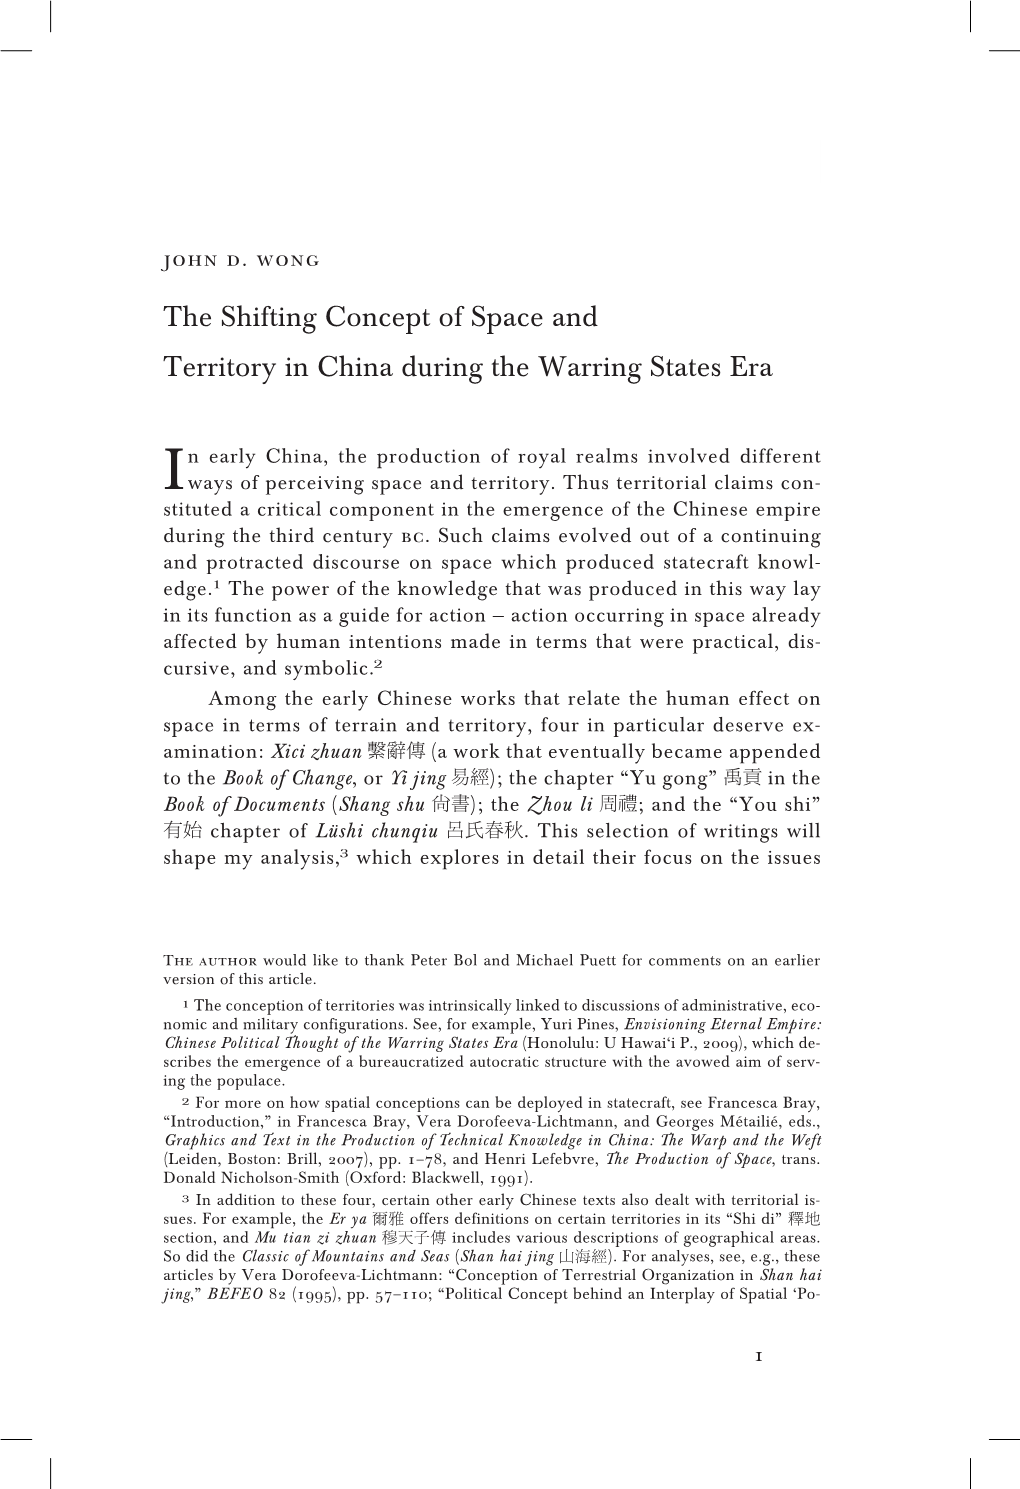 The Shifting Concept of Space and Territory in China During the Warring States Era